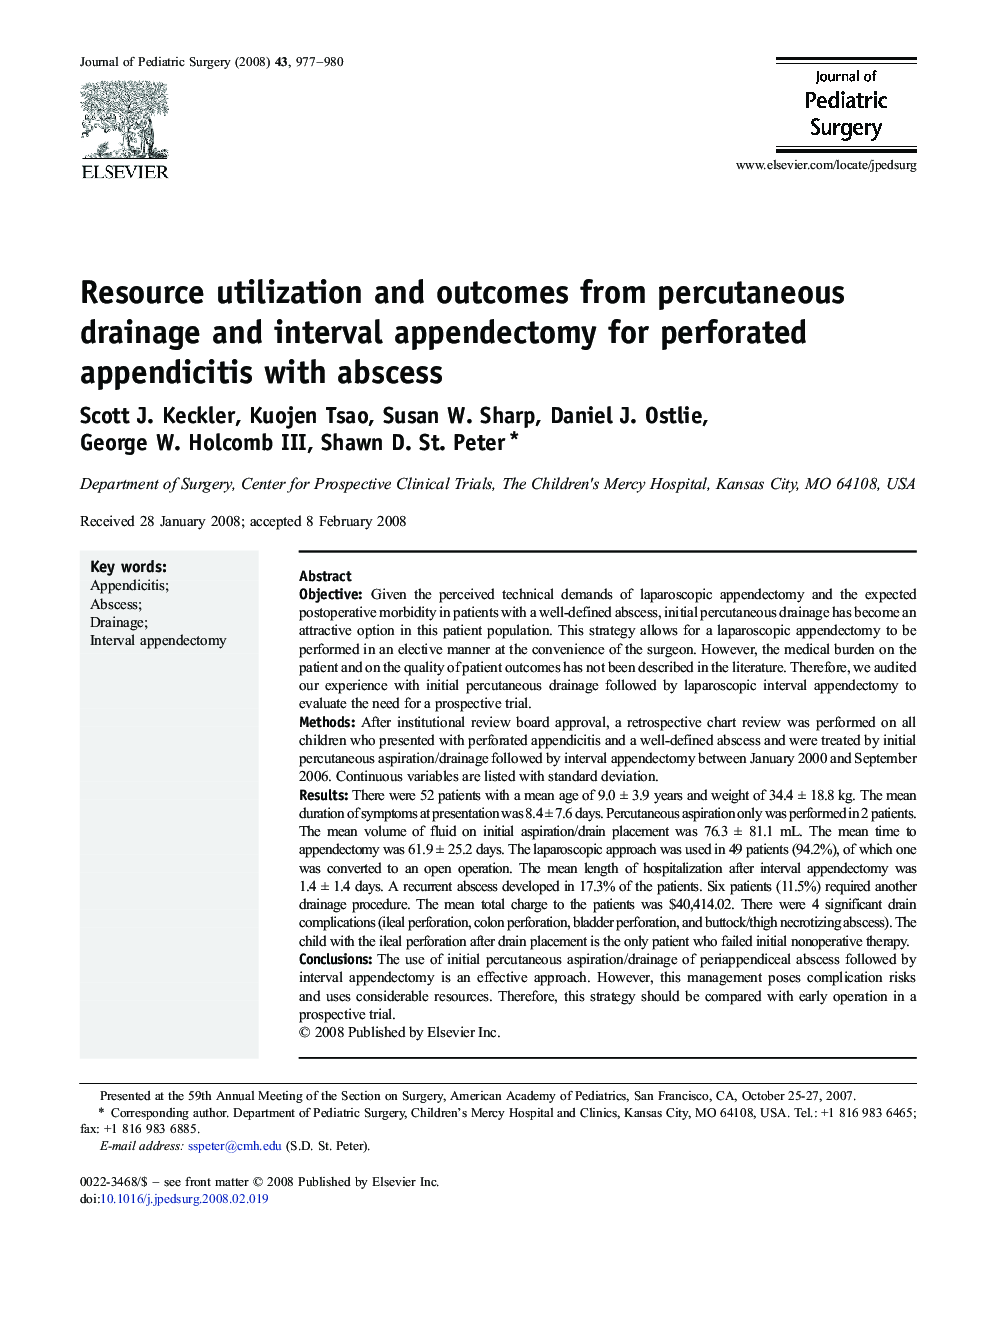 Resource utilization and outcomes from percutaneous drainage and interval appendectomy for perforated appendicitis with abscess 